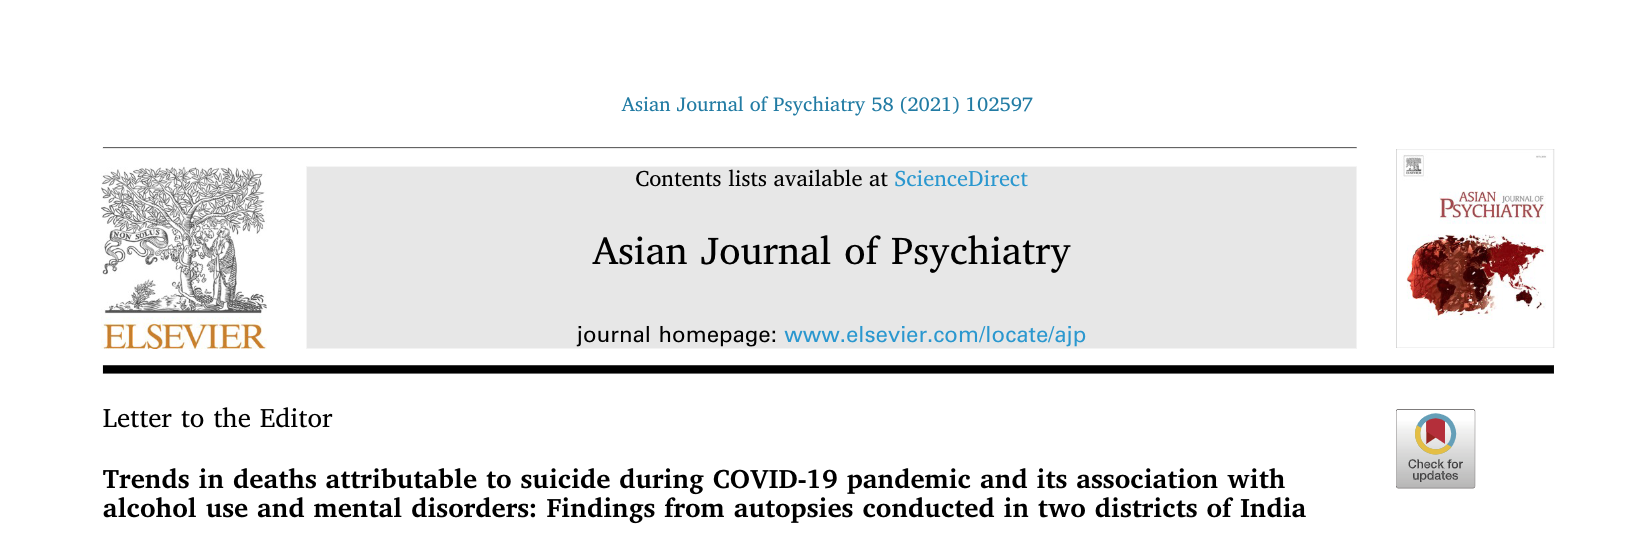 Trends in deaths attributable to suicide during COVID19 pandemic